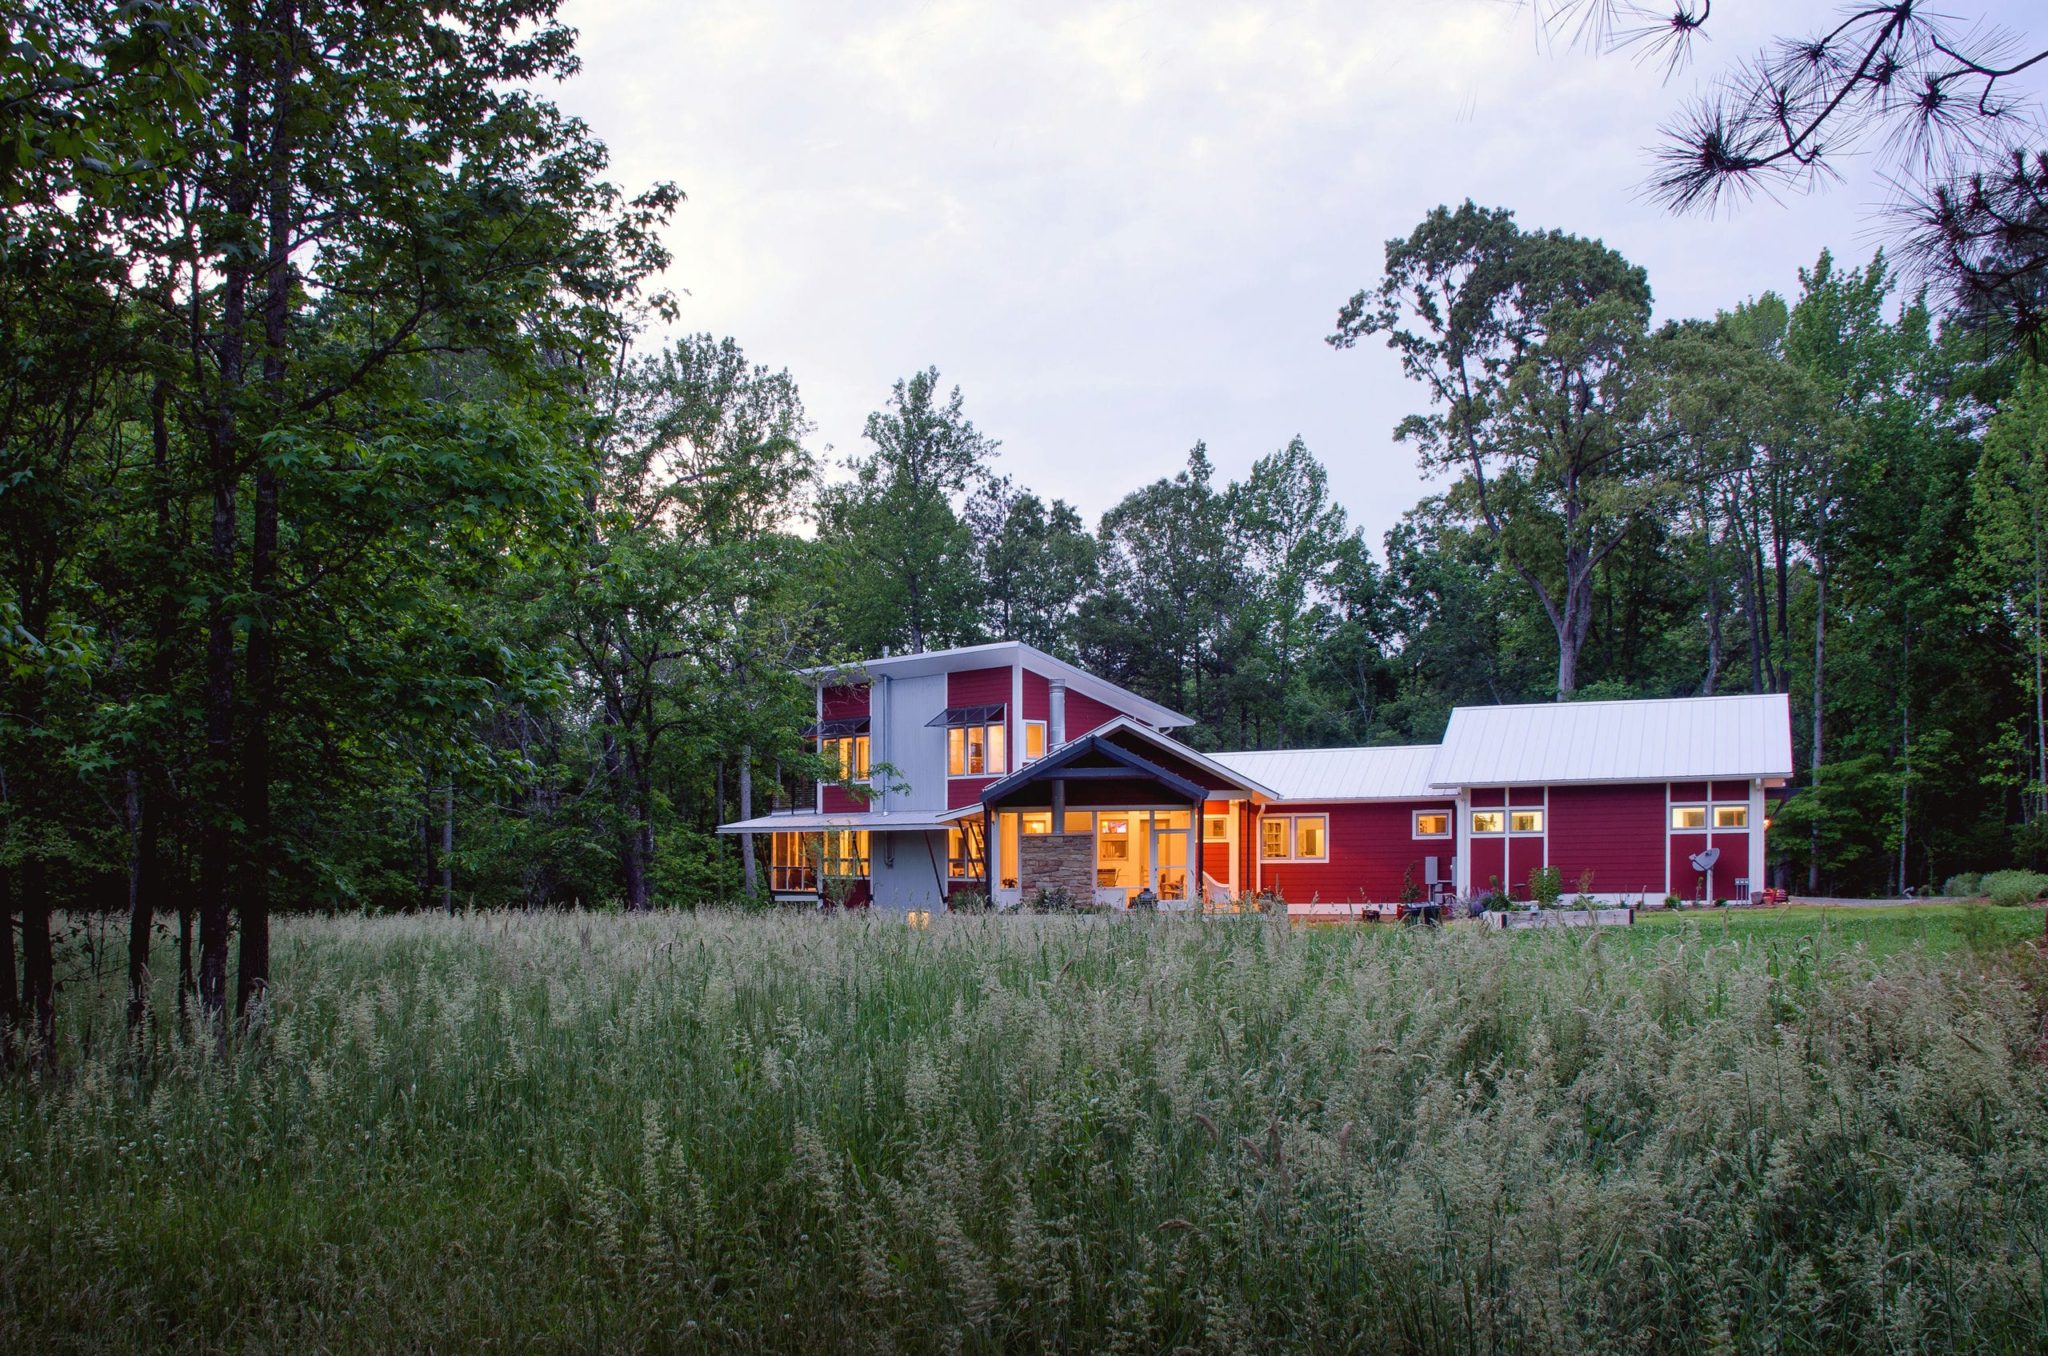 A view of the house at dusk, tucked away in tall grasses of a meadow. Red siding, white trim and standing seam metal roofs evoke a connection to the rural landscape.